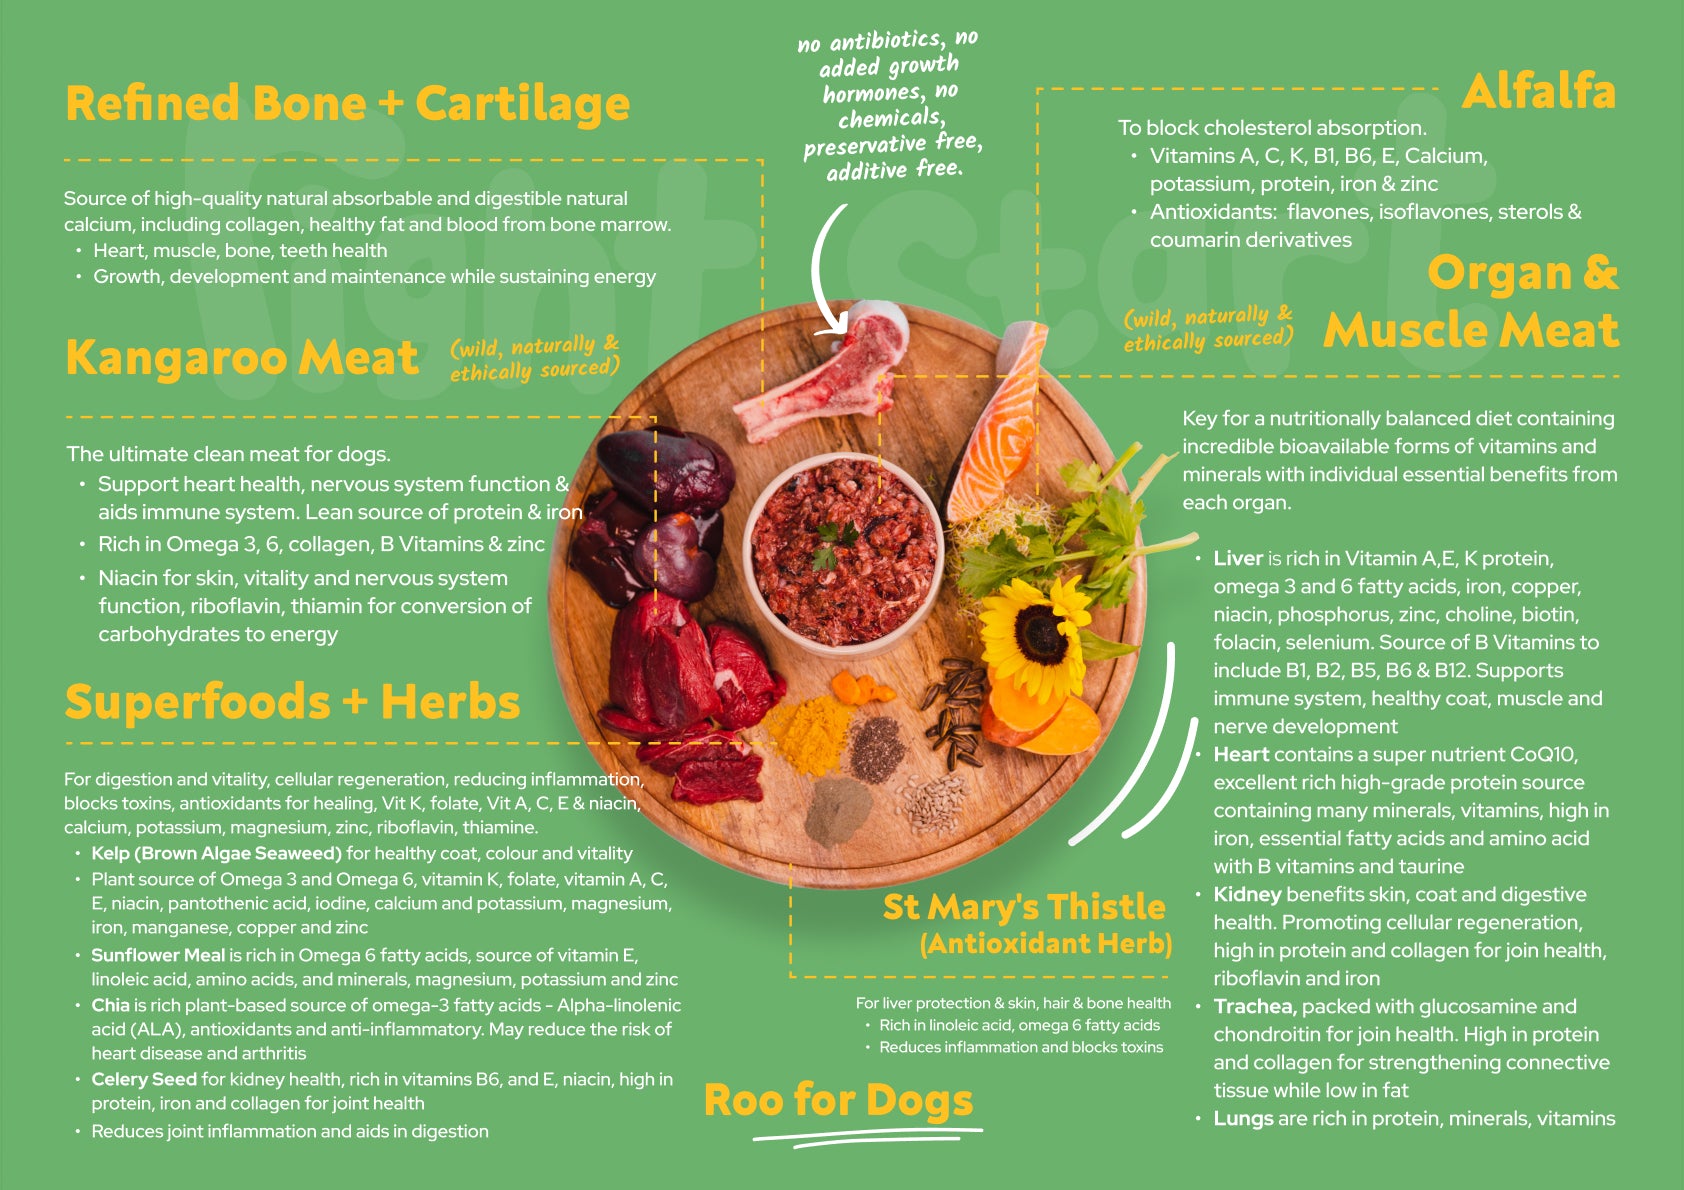 roo for dogs nutrient breakdown right start pet food. superfoods and herbs, alfalfa, st mary’s thistle, kangaroo organ and muscle meat, refined bone and cartilage nothing added